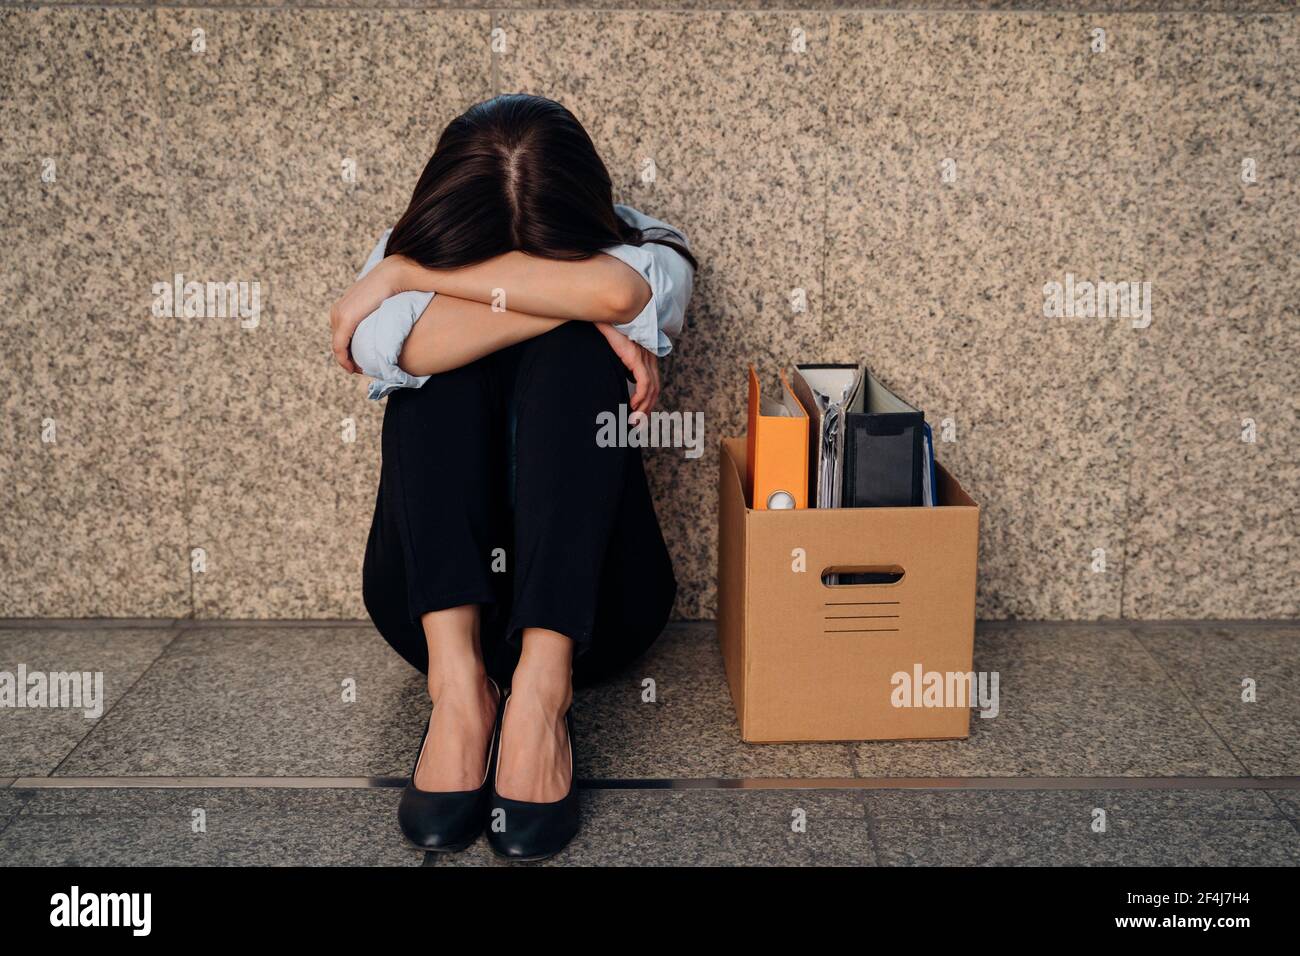 Unrecognized young woman hiding her face after being laid off from job due to economic recession sitting with carton of belongings on floor and crying Stock Photo